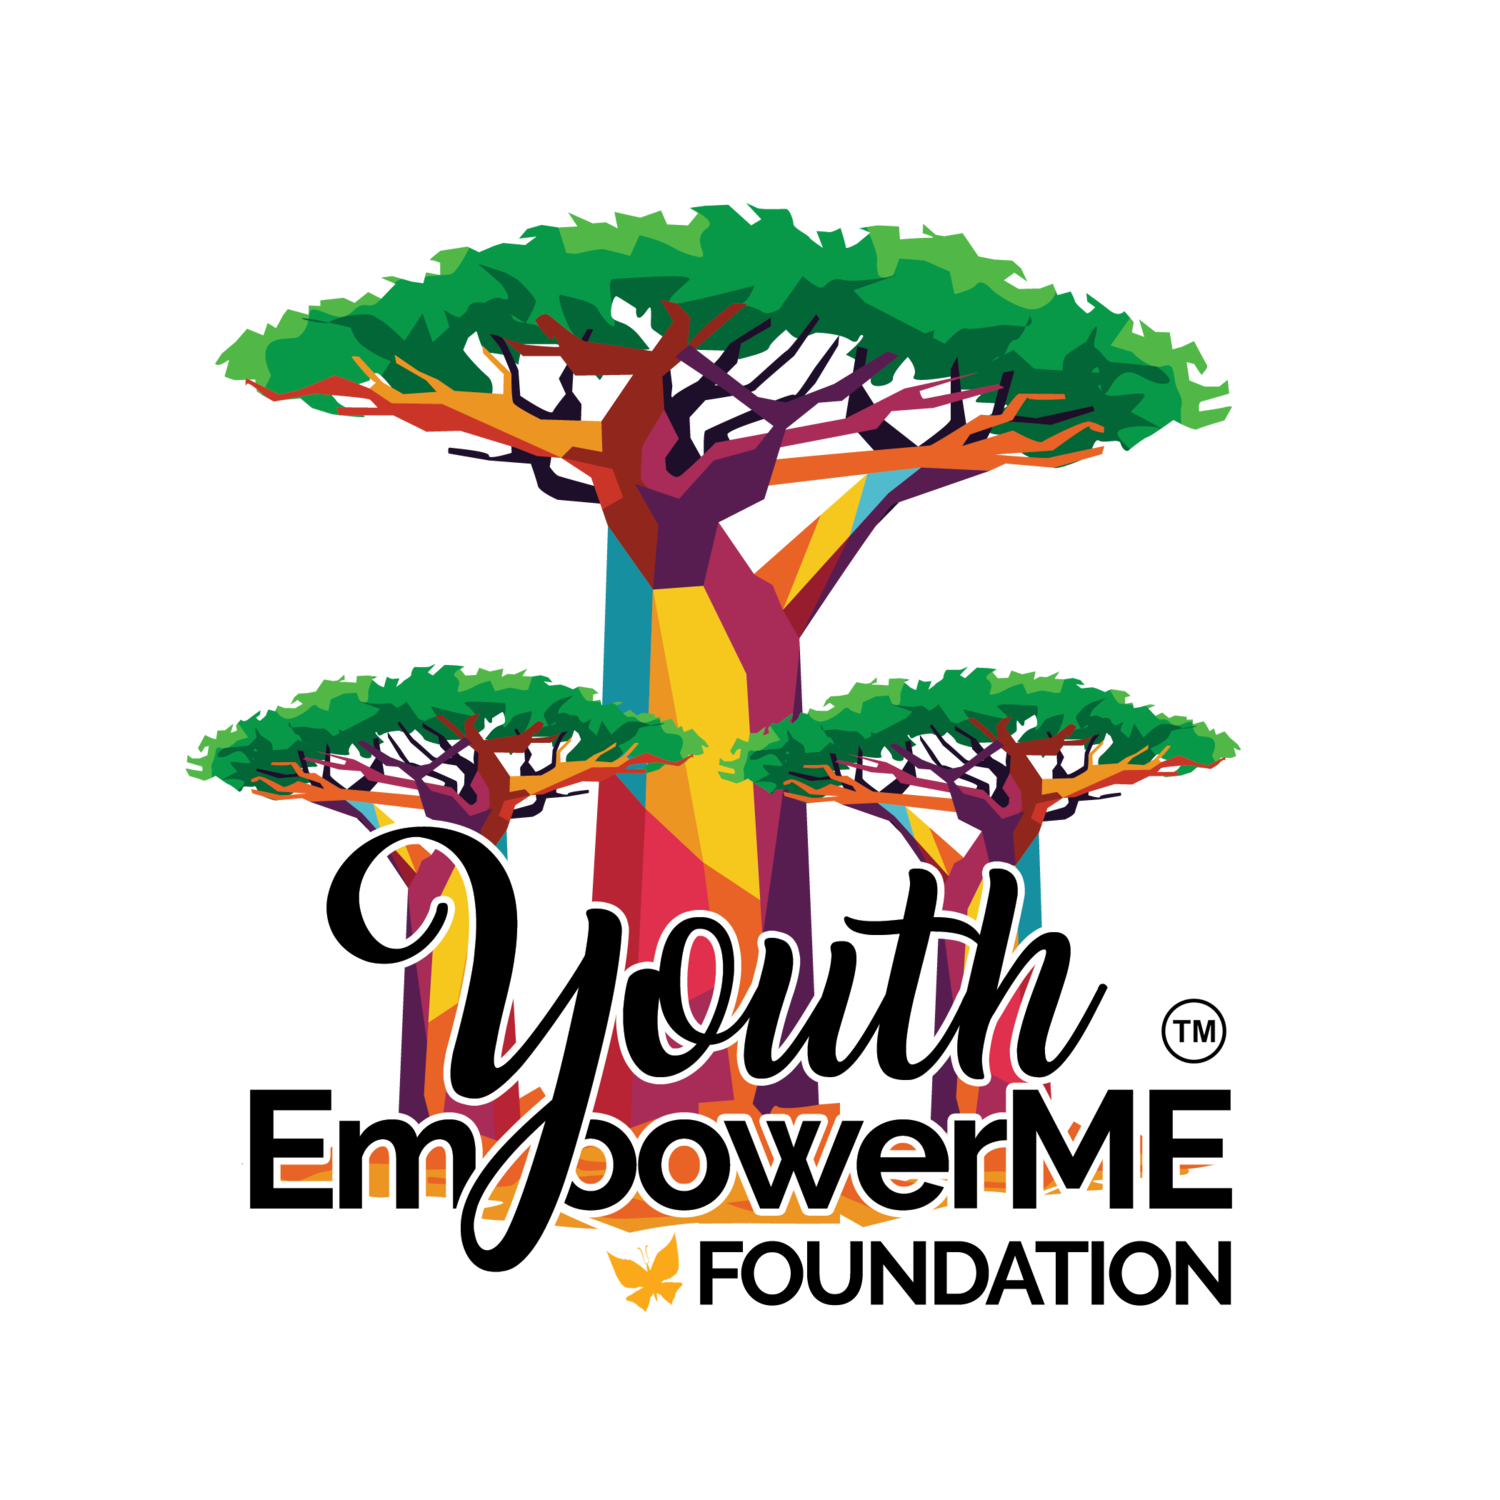 Youth EmpowerMe Foundation Inc.